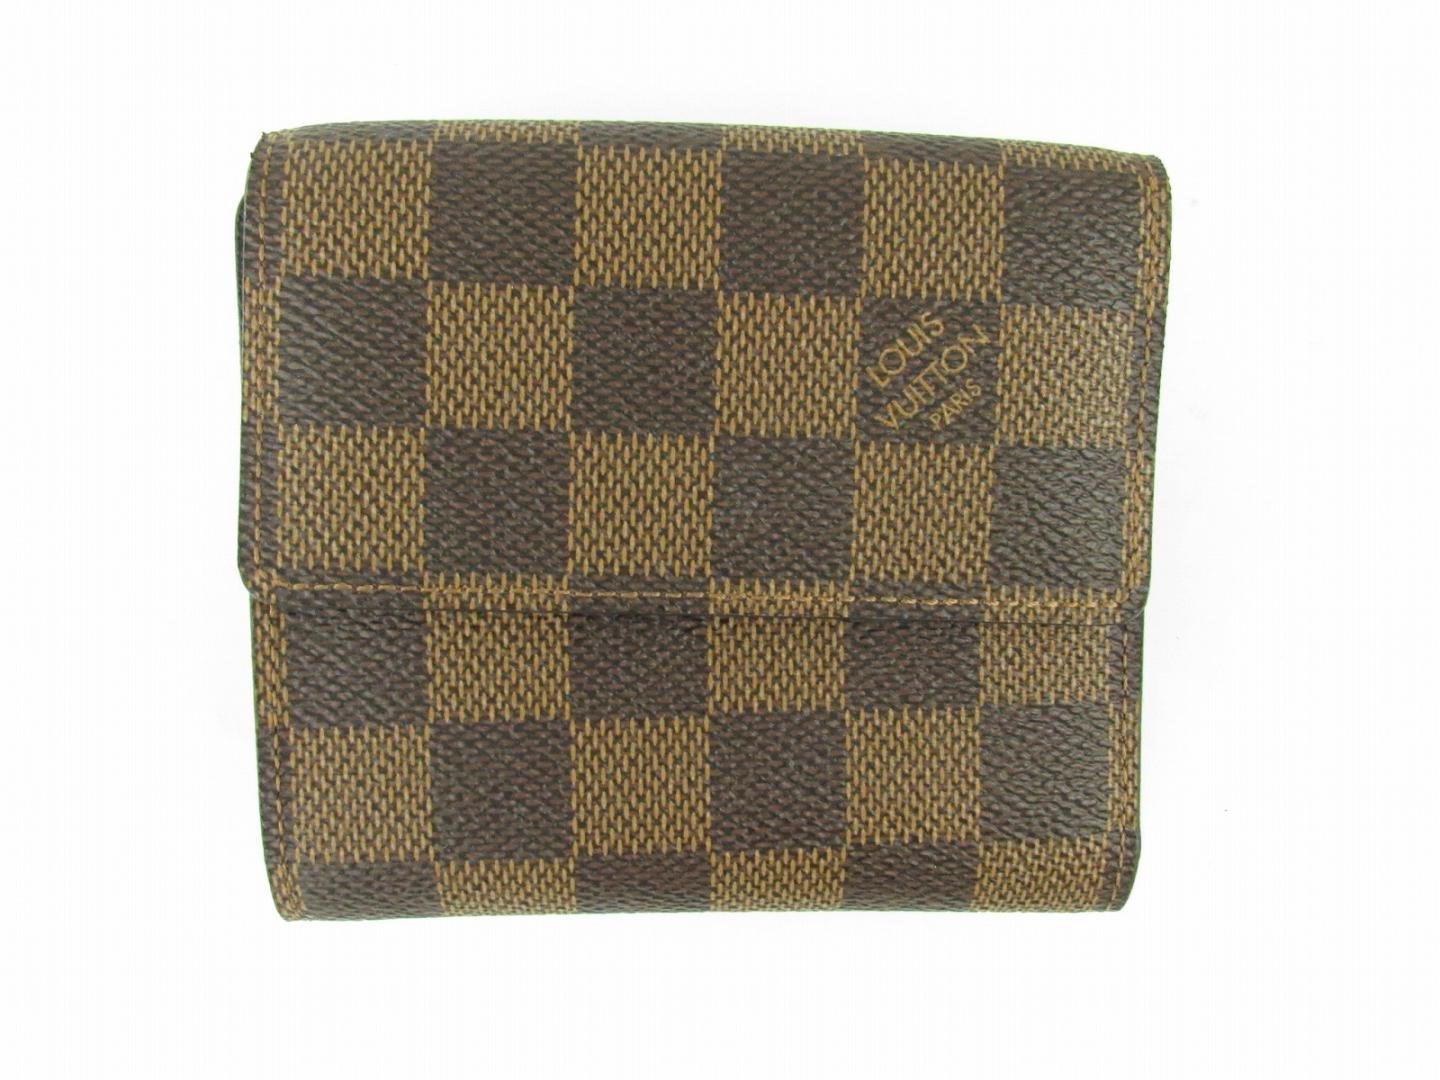 Louis Vuitton Portefeuille Elise Trifold Wallet Purse Damier Leather N61654 in Brown - Lyst